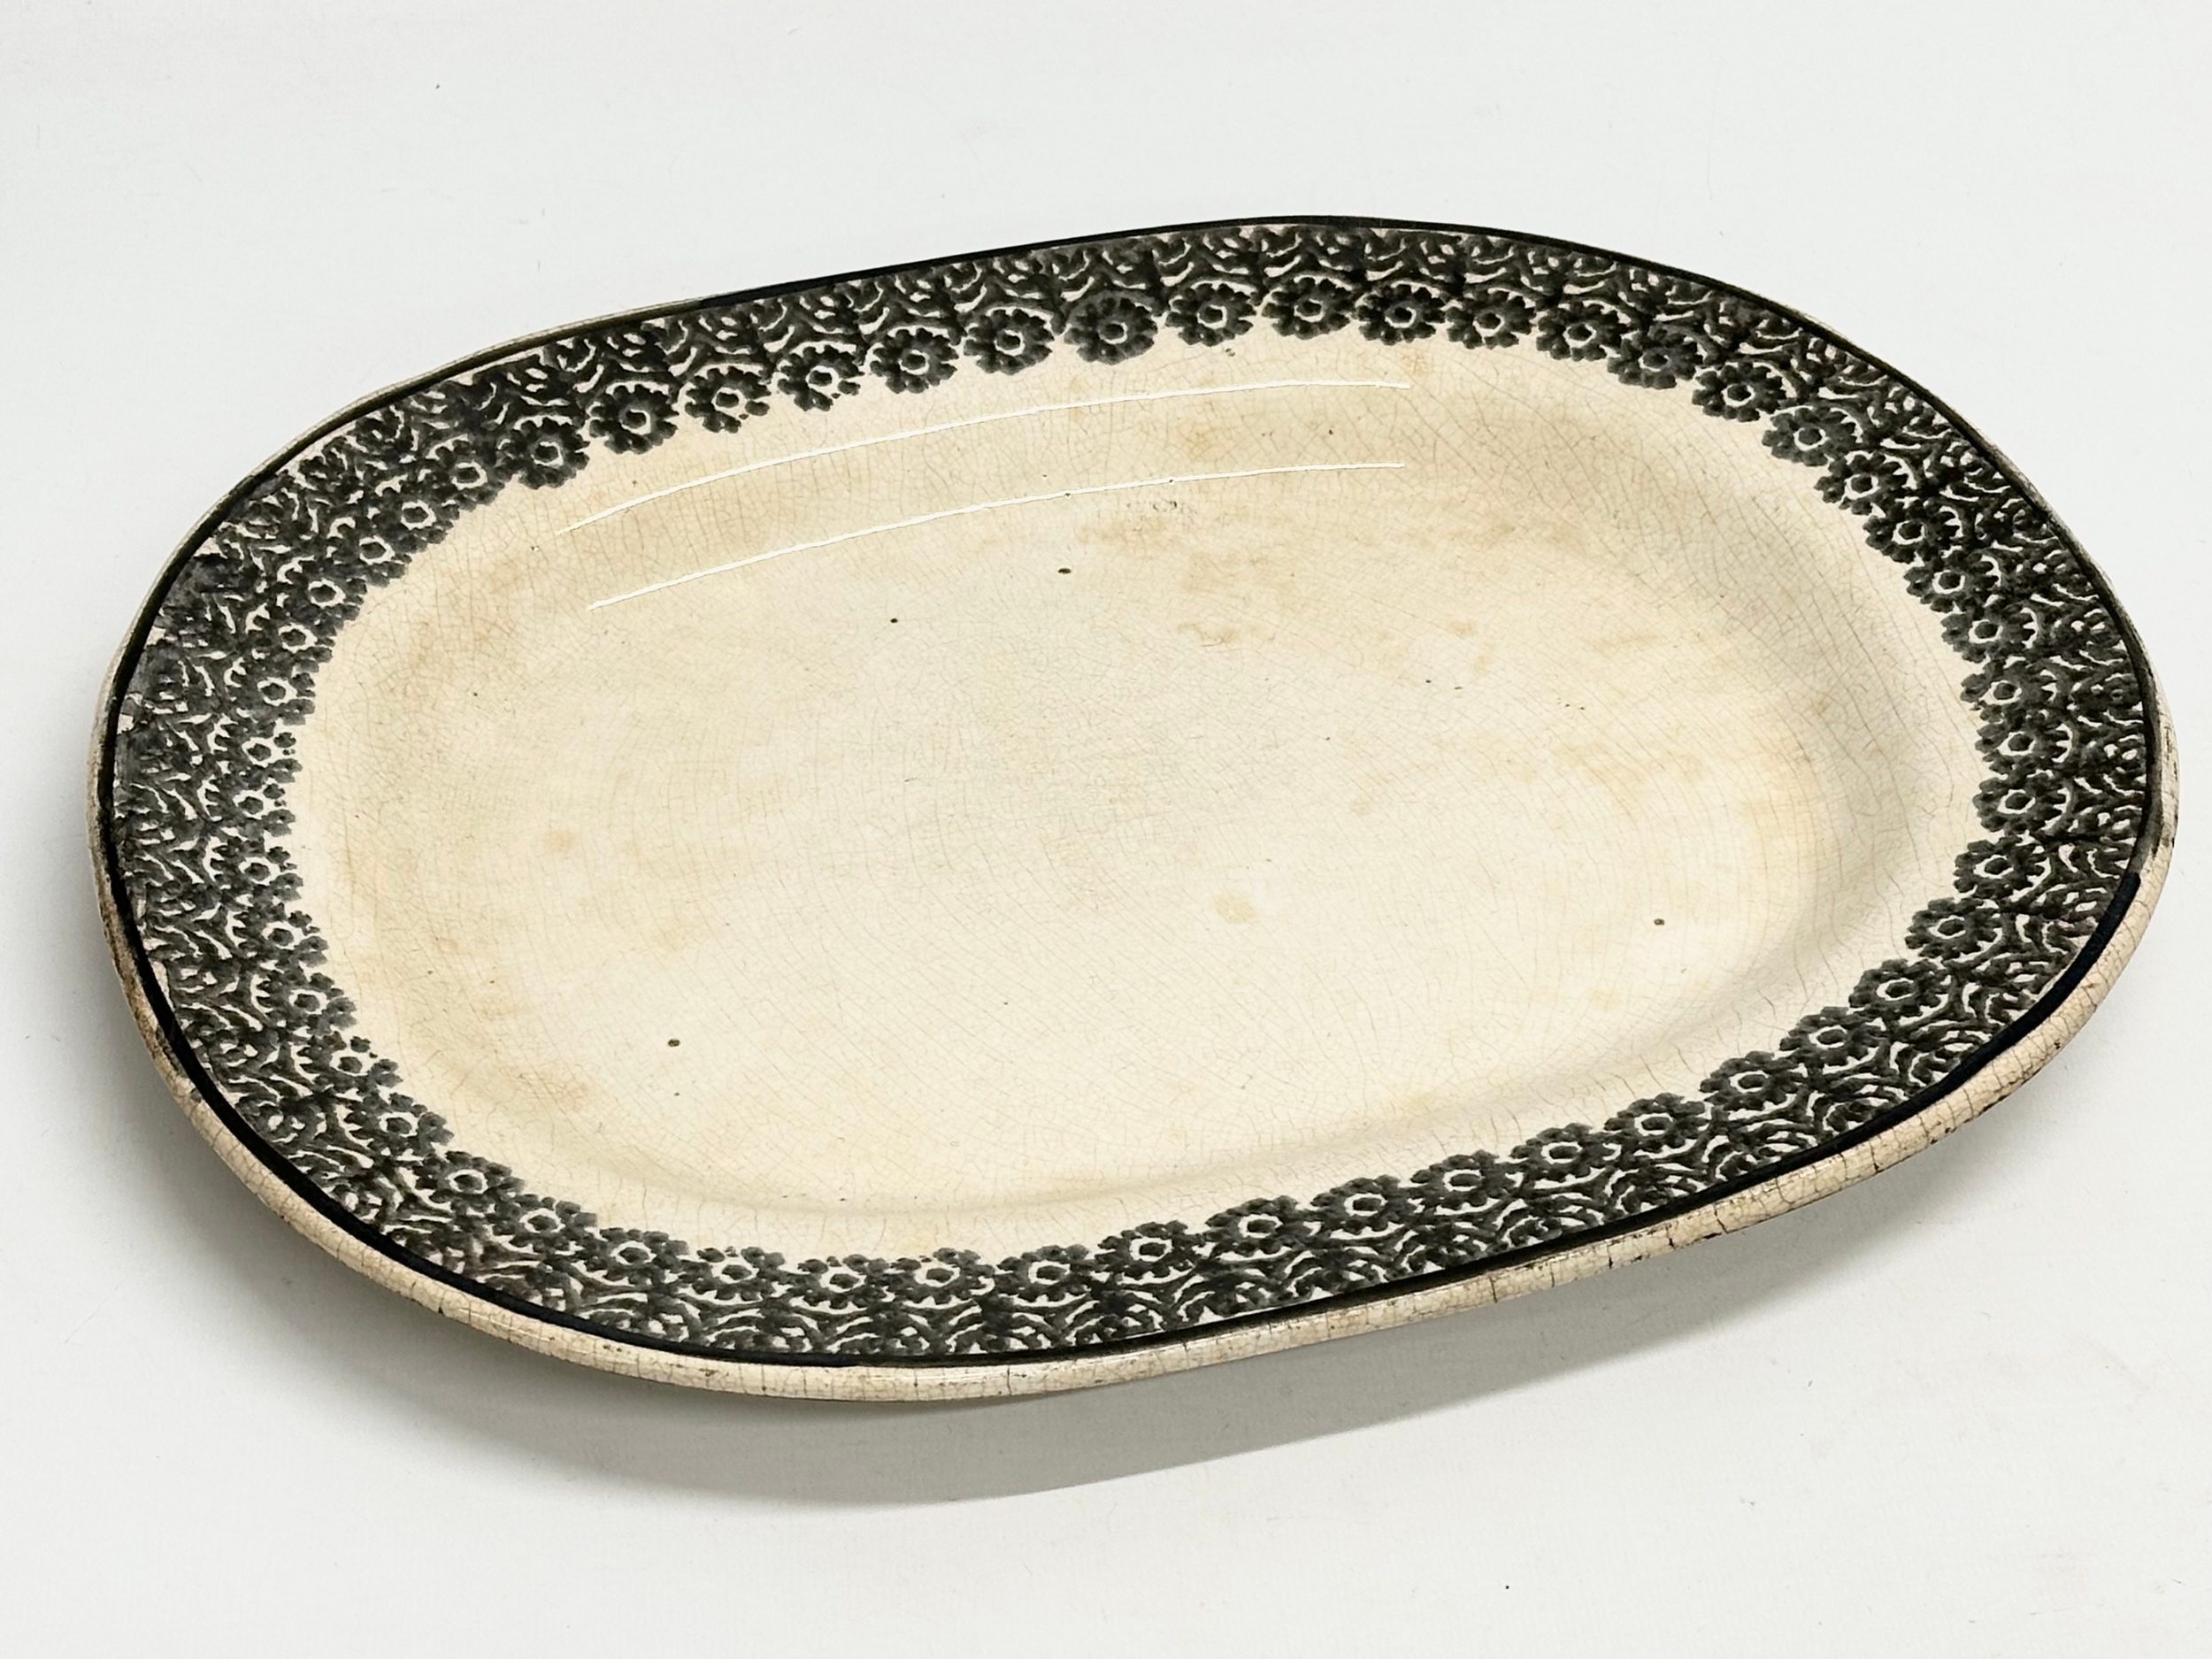 A collection of Mid 19th Century Sponge Ware. A Sponge Ware meat platter 39x32cm. A Sponge Ware bowl - Image 4 of 10